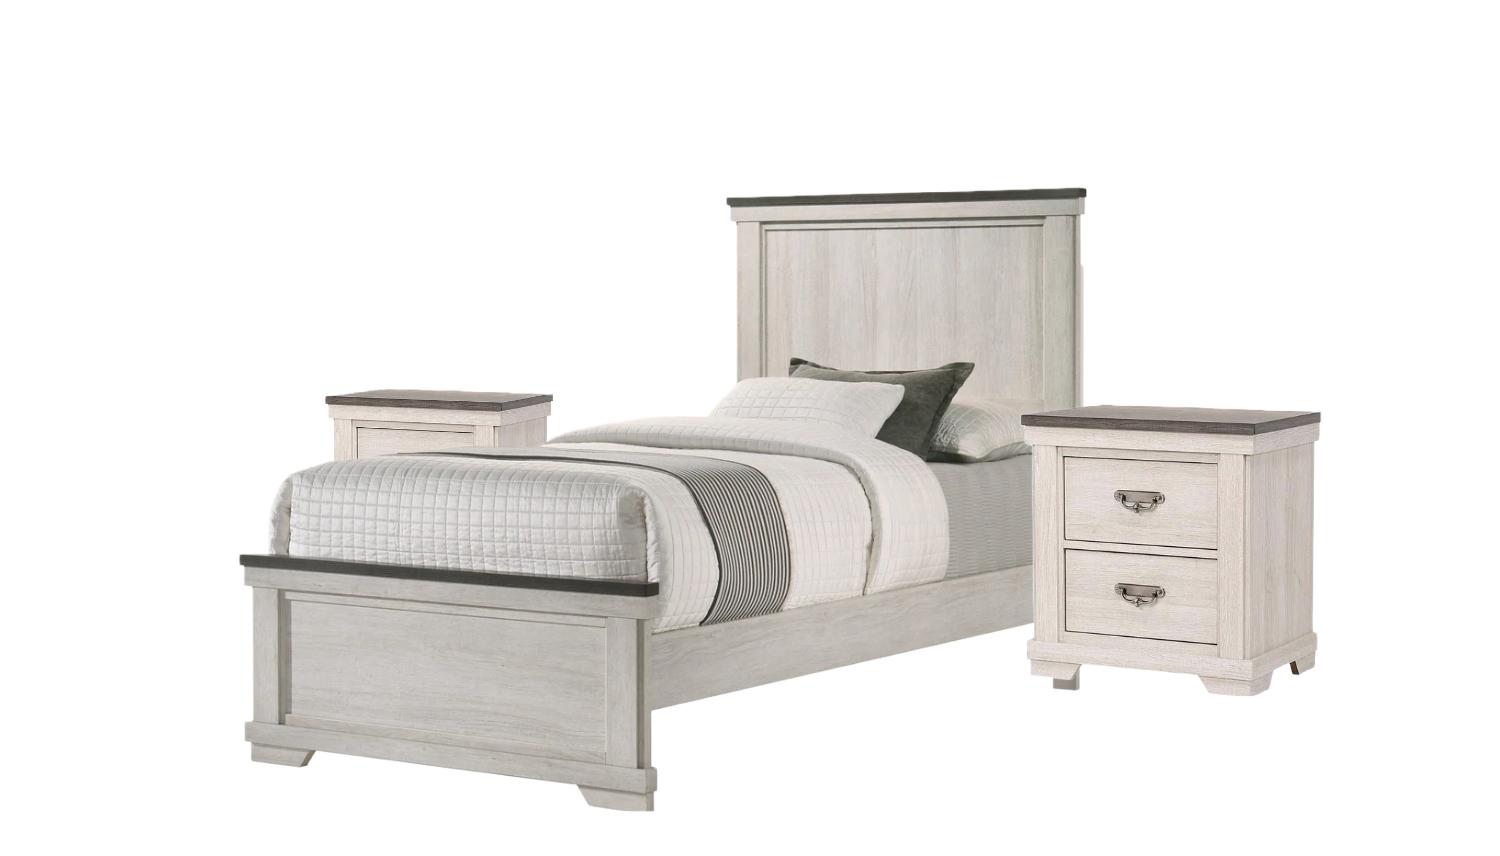 Rustic, Farmhouse Panel Bedroom Set Leighton B8180-T-Bed-3pcs in Antique White 